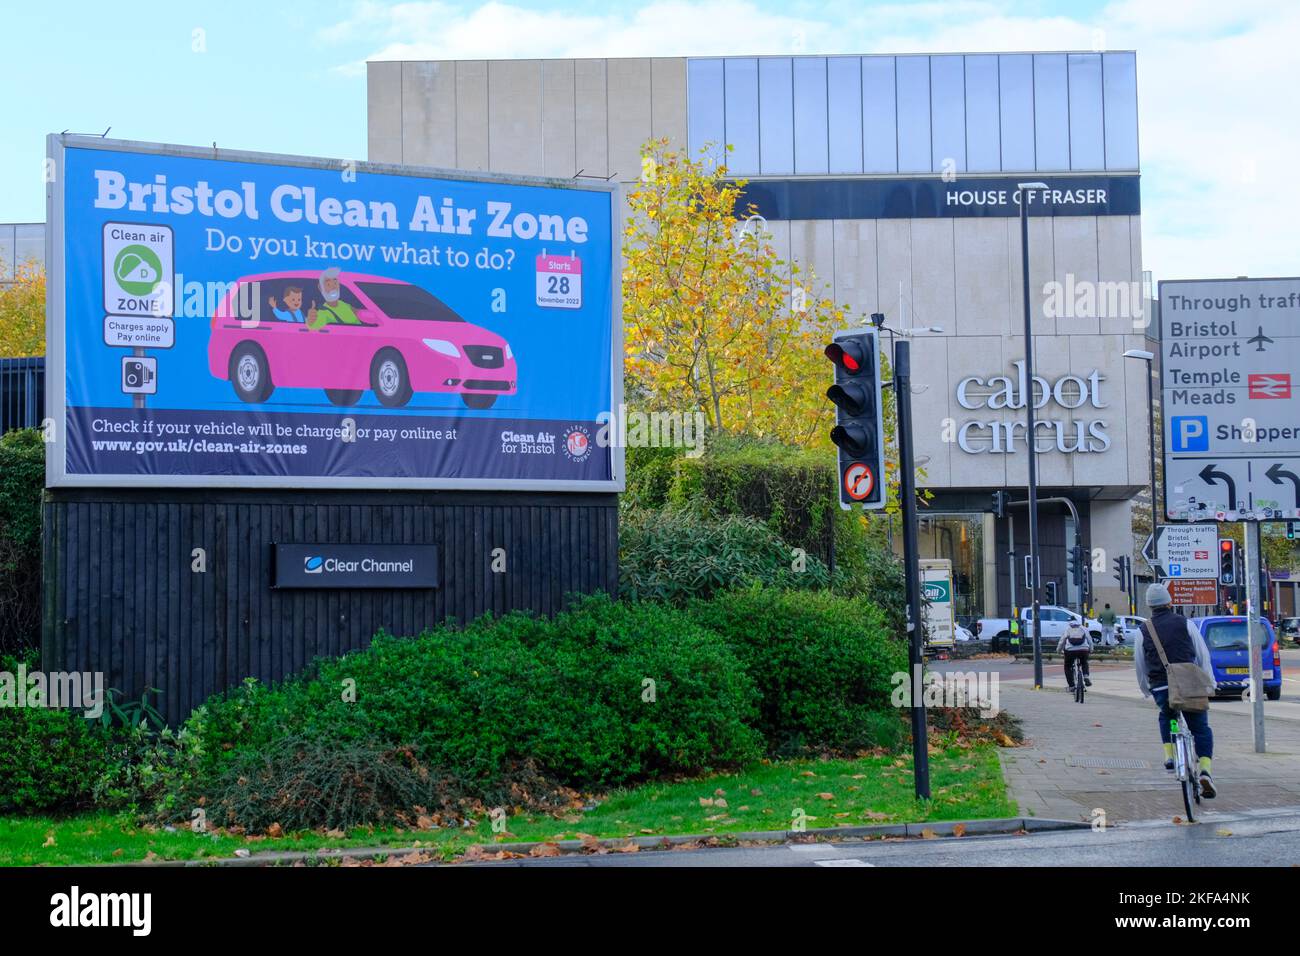 Bristol, UK. 17th Nov, 2022. The Bristol Clean Air Zone will be implemented on the 28th Nov, just as First Bus, a major bus operator in Bristol announces it is reducing a significant number of journeys due to a driver shortage. The Clean Air Zone or CAZ will limit the number of polluting vehicles entering the city, forcing people to use public transport. First Bus hopes that by giving advance notice it will allow customers to make alternative plans. Credit: JMF News/Alamy Live News Stock Photo